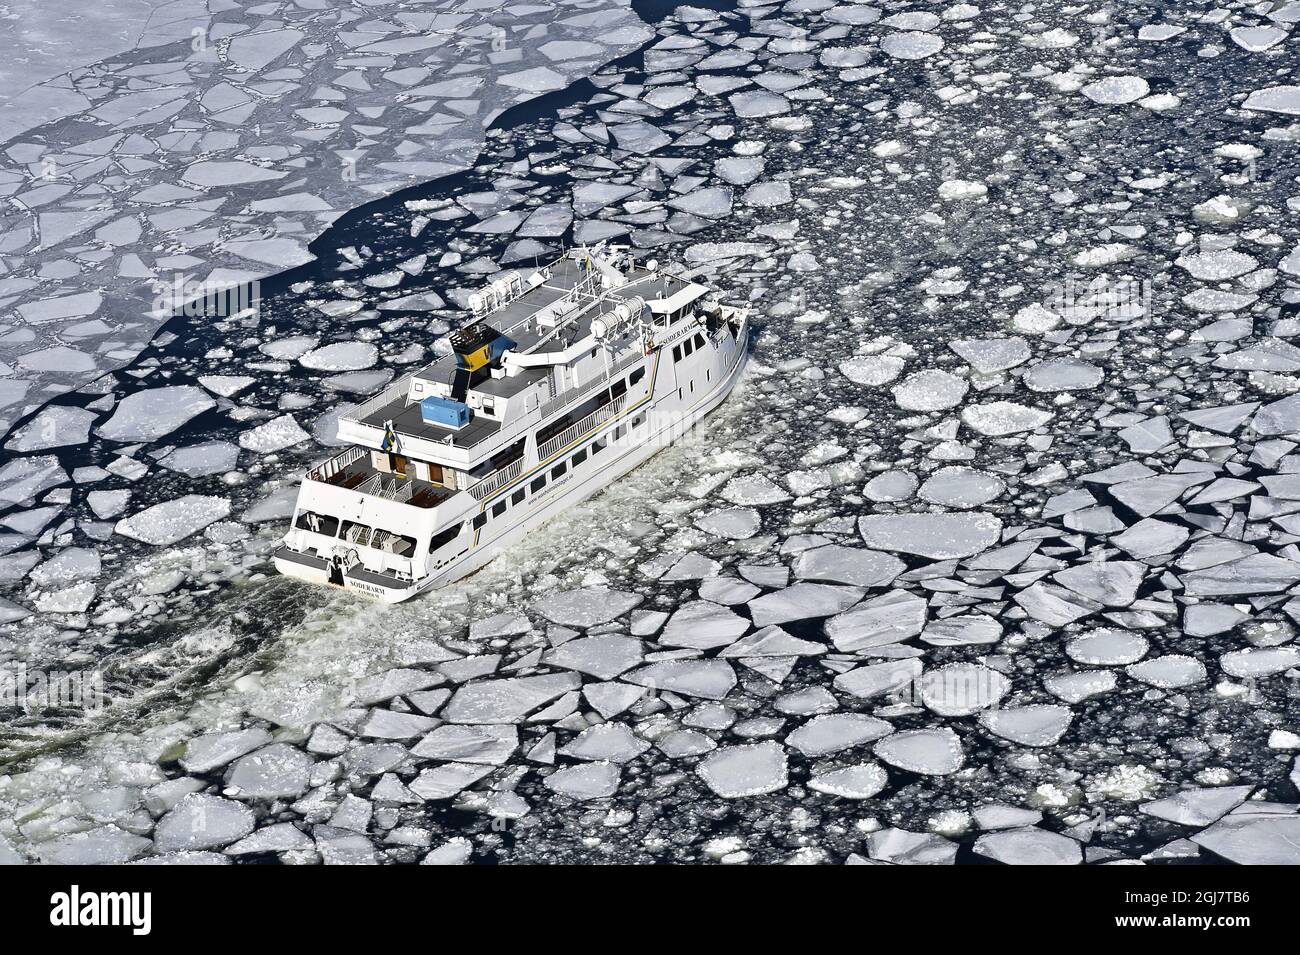 STOCKHOLM 2013-04-05 The ferry Soderarm is seen making its way through a broken ice channel to the island Husaro in StockholmÂ’s archipelago on Friday April 4, 2013. SMHI, the Swedish government agency on weather forecasts and climate, reports that there is a record spread of ice around SwedenÂ’s coasts this late in the winter. At first forecasters expected the ice on the Baltic sea to reach its maximum in late January, but a prolonged spell of high pressure that arrived over in early March caused new ice to form late in the season, resulting in the record-late date. Anders Wiklund / SCANPIX / Stock Photo